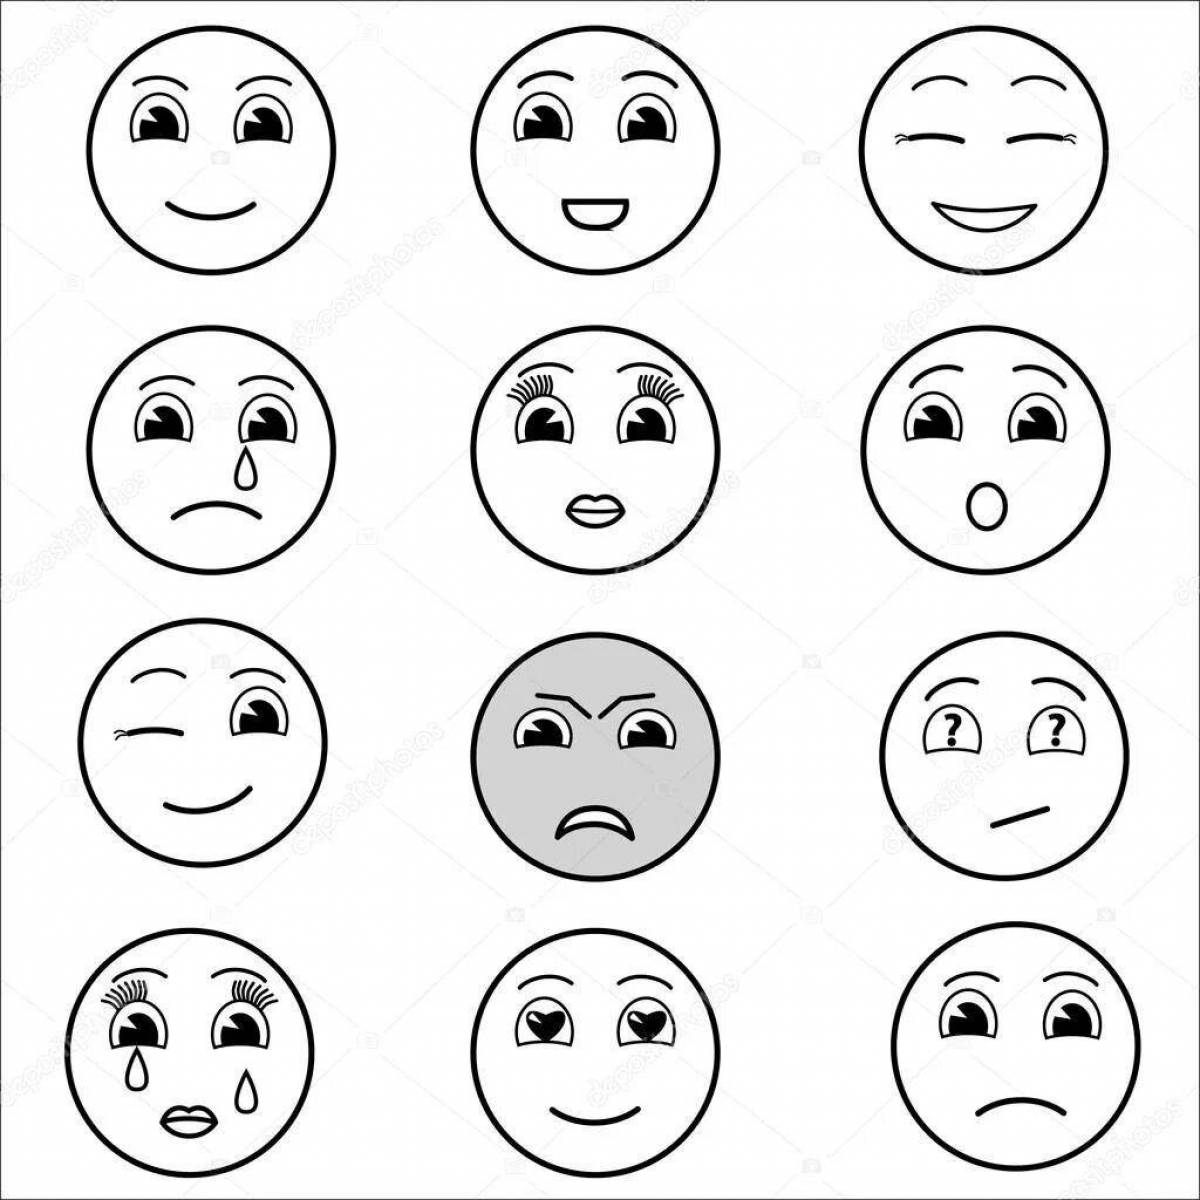 Calm coloring of emotions for children